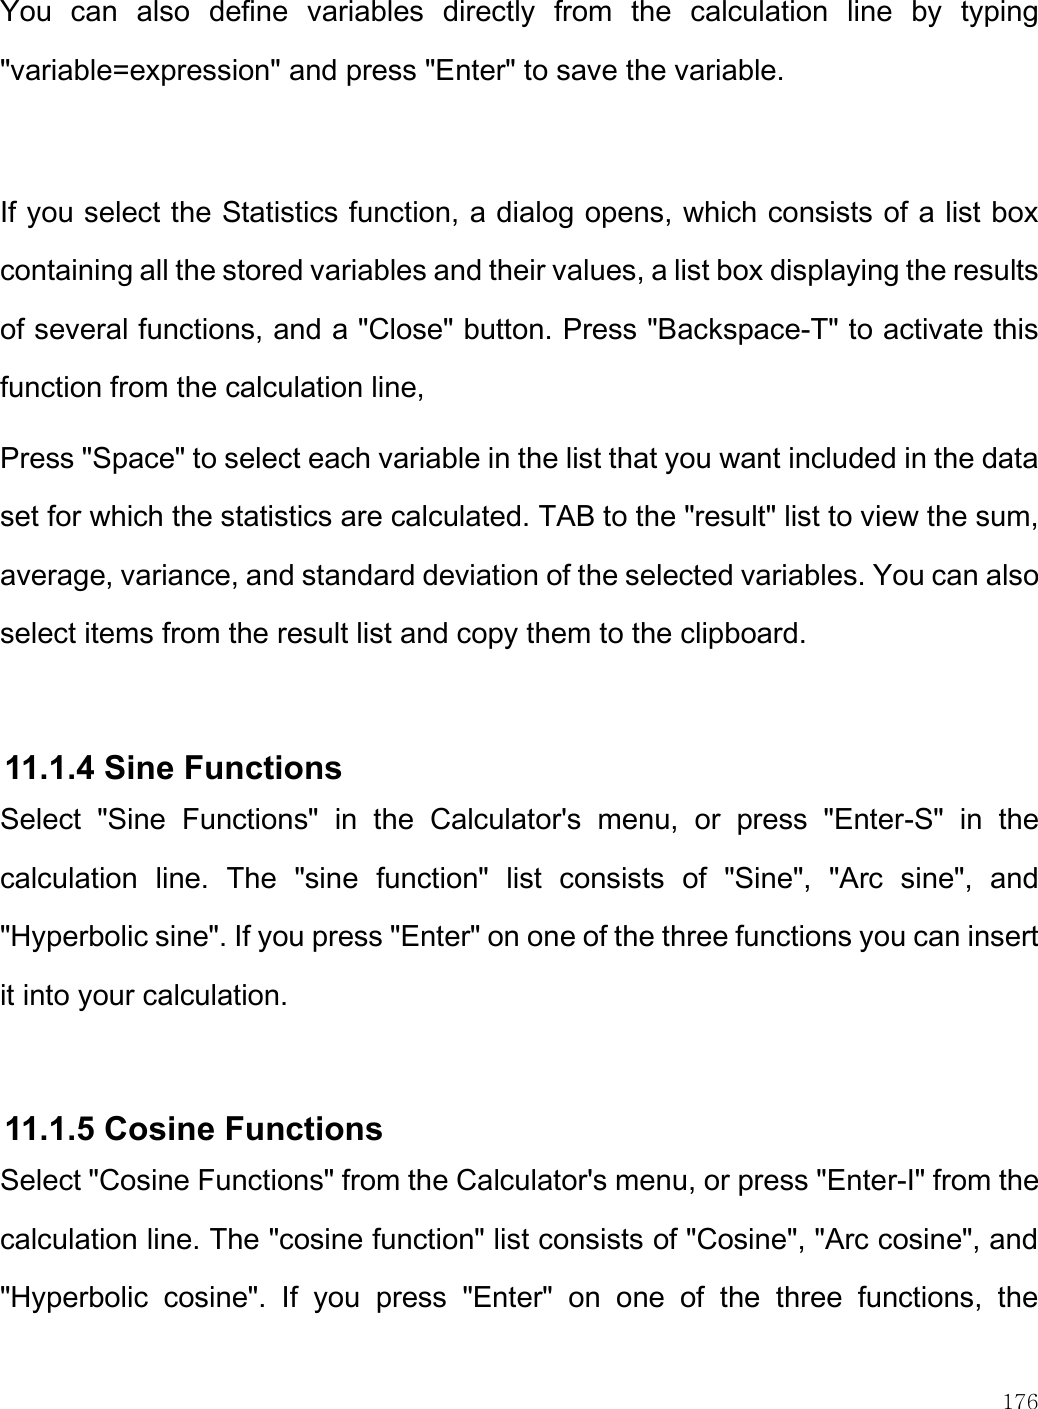    176  You  can  also  define  variables  directly  from  the  calculation  line  by  typing &quot;variable=expression&quot; and press &quot;Enter&quot; to save the variable.   If you select the Statistics function, a dialog opens, which consists of a list box containing all the stored variables and their values, a list box displaying the results of several functions, and a &quot;Close&quot; button. Press &quot;Backspace-T&quot; to activate this function from the calculation line,  Press &quot;Space&quot; to select each variable in the list that you want included in the data set for which the statistics are calculated. TAB to the &quot;result&quot; list to view the sum, average, variance, and standard deviation of the selected variables. You can also select items from the result list and copy them to the clipboard.   11.1.4 Sine Functions Select  &quot;Sine  Functions&quot;  in  the  Calculator&apos;s  menu,  or  press  &quot;Enter-S&quot;  in  the calculation  line.  The  &quot;sine  function&quot;  list  consists  of  &quot;Sine&quot;,  &quot;Arc  sine&quot;,  and &quot;Hyperbolic sine&quot;. If you press &quot;Enter&quot; on one of the three functions you can insert it into your calculation.   11.1.5 Cosine Functions Select &quot;Cosine Functions&quot; from the Calculator&apos;s menu, or press &quot;Enter-I&quot; from the calculation line. The &quot;cosine function&quot; list consists of &quot;Cosine&quot;, &quot;Arc cosine&quot;, and &quot;Hyperbolic  cosine&quot;.  If  you  press  &quot;Enter&quot;  on  one  of  the  three  functions,  the 